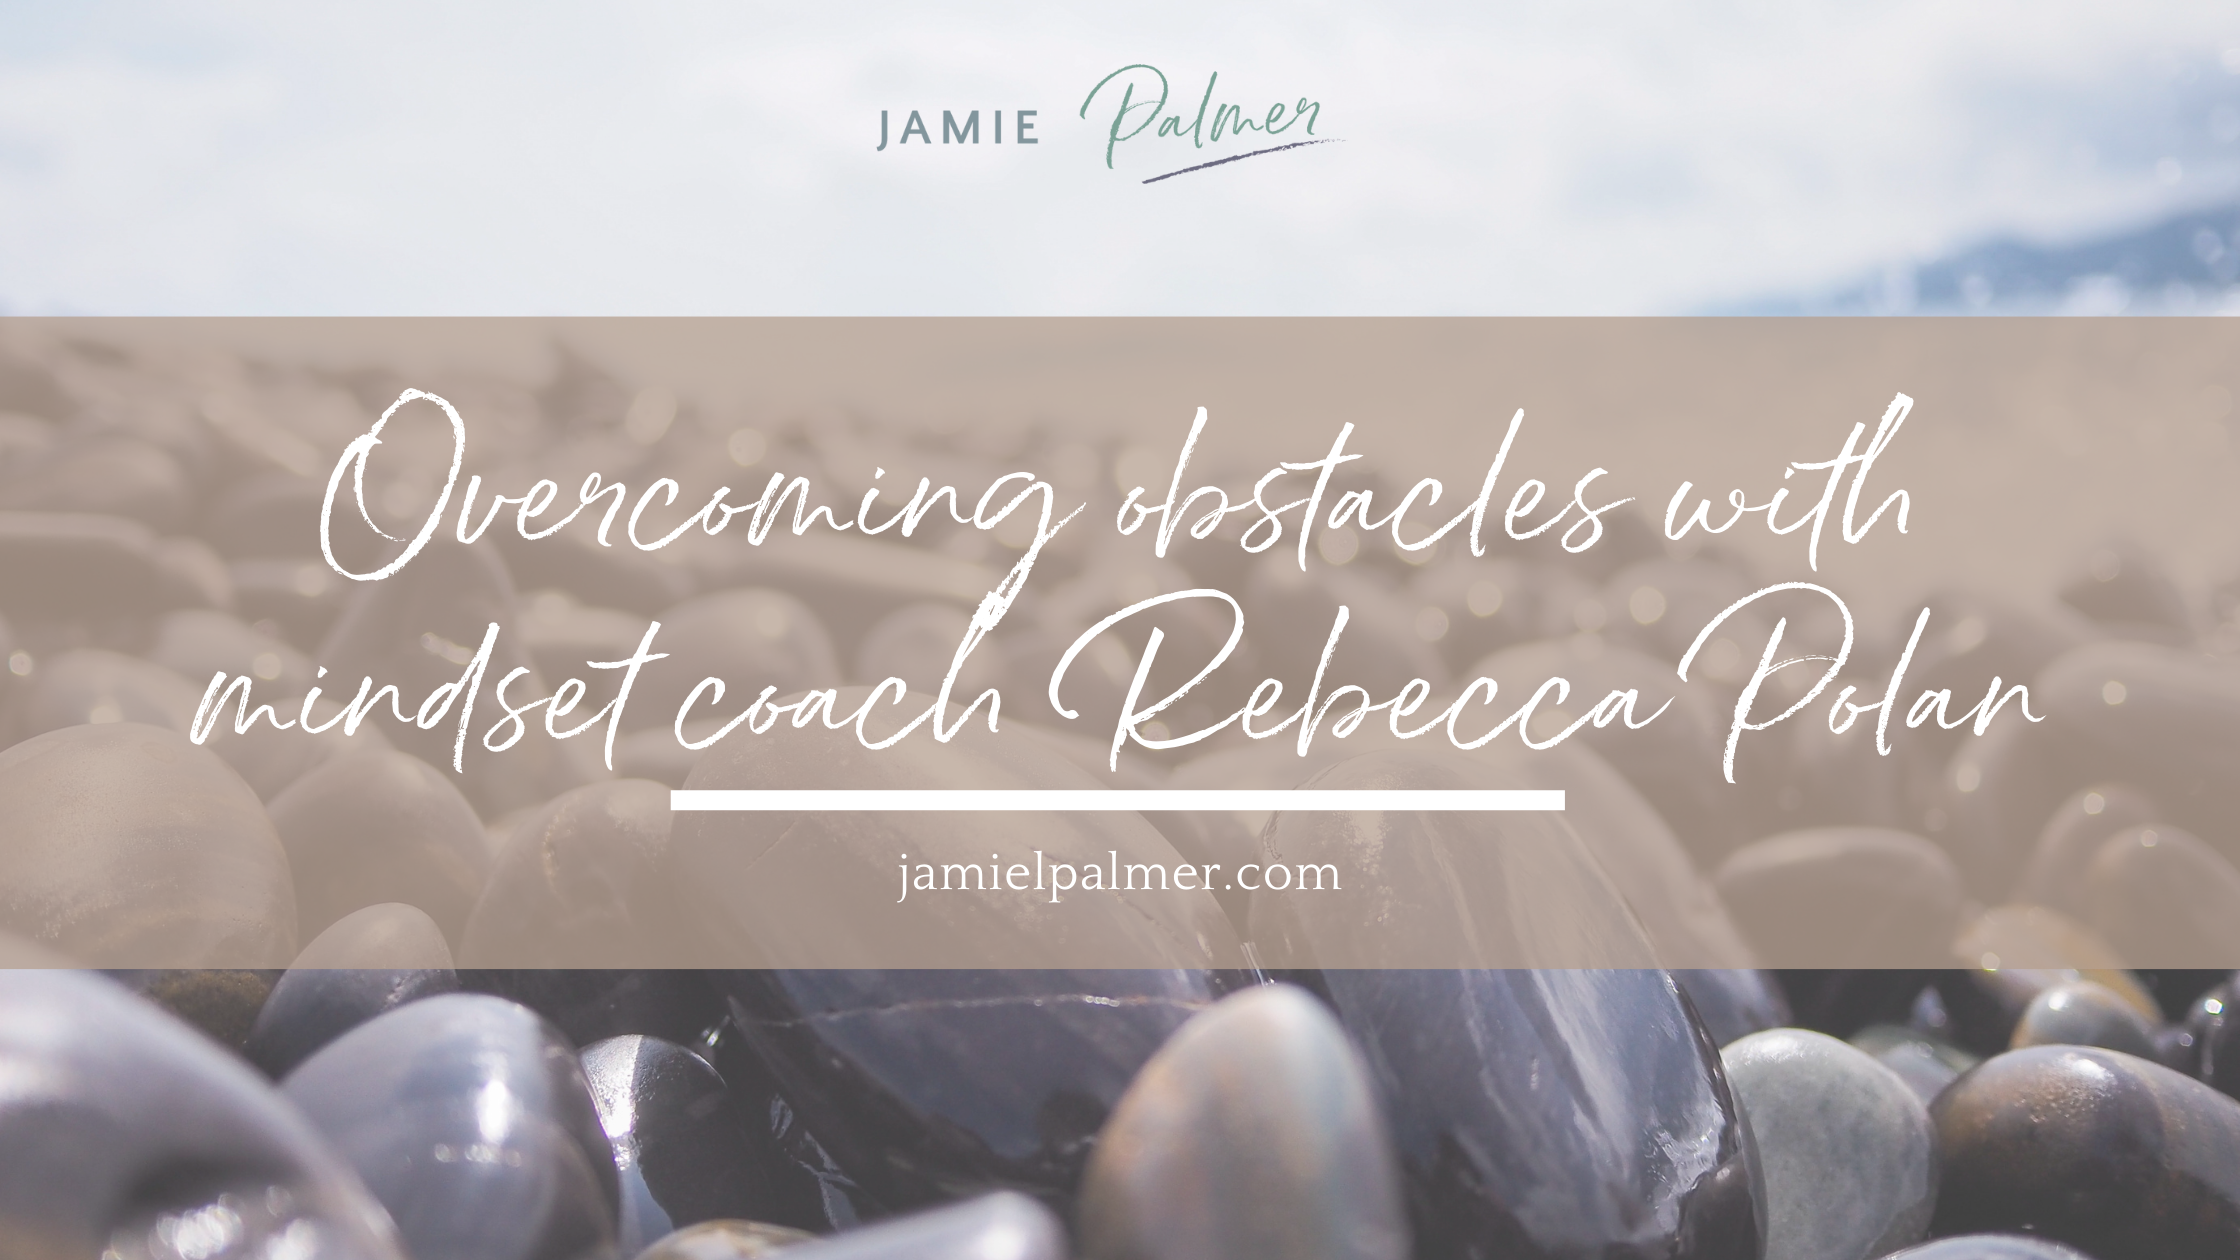 overcoming obstacles with mindset coach Rebecca Polan